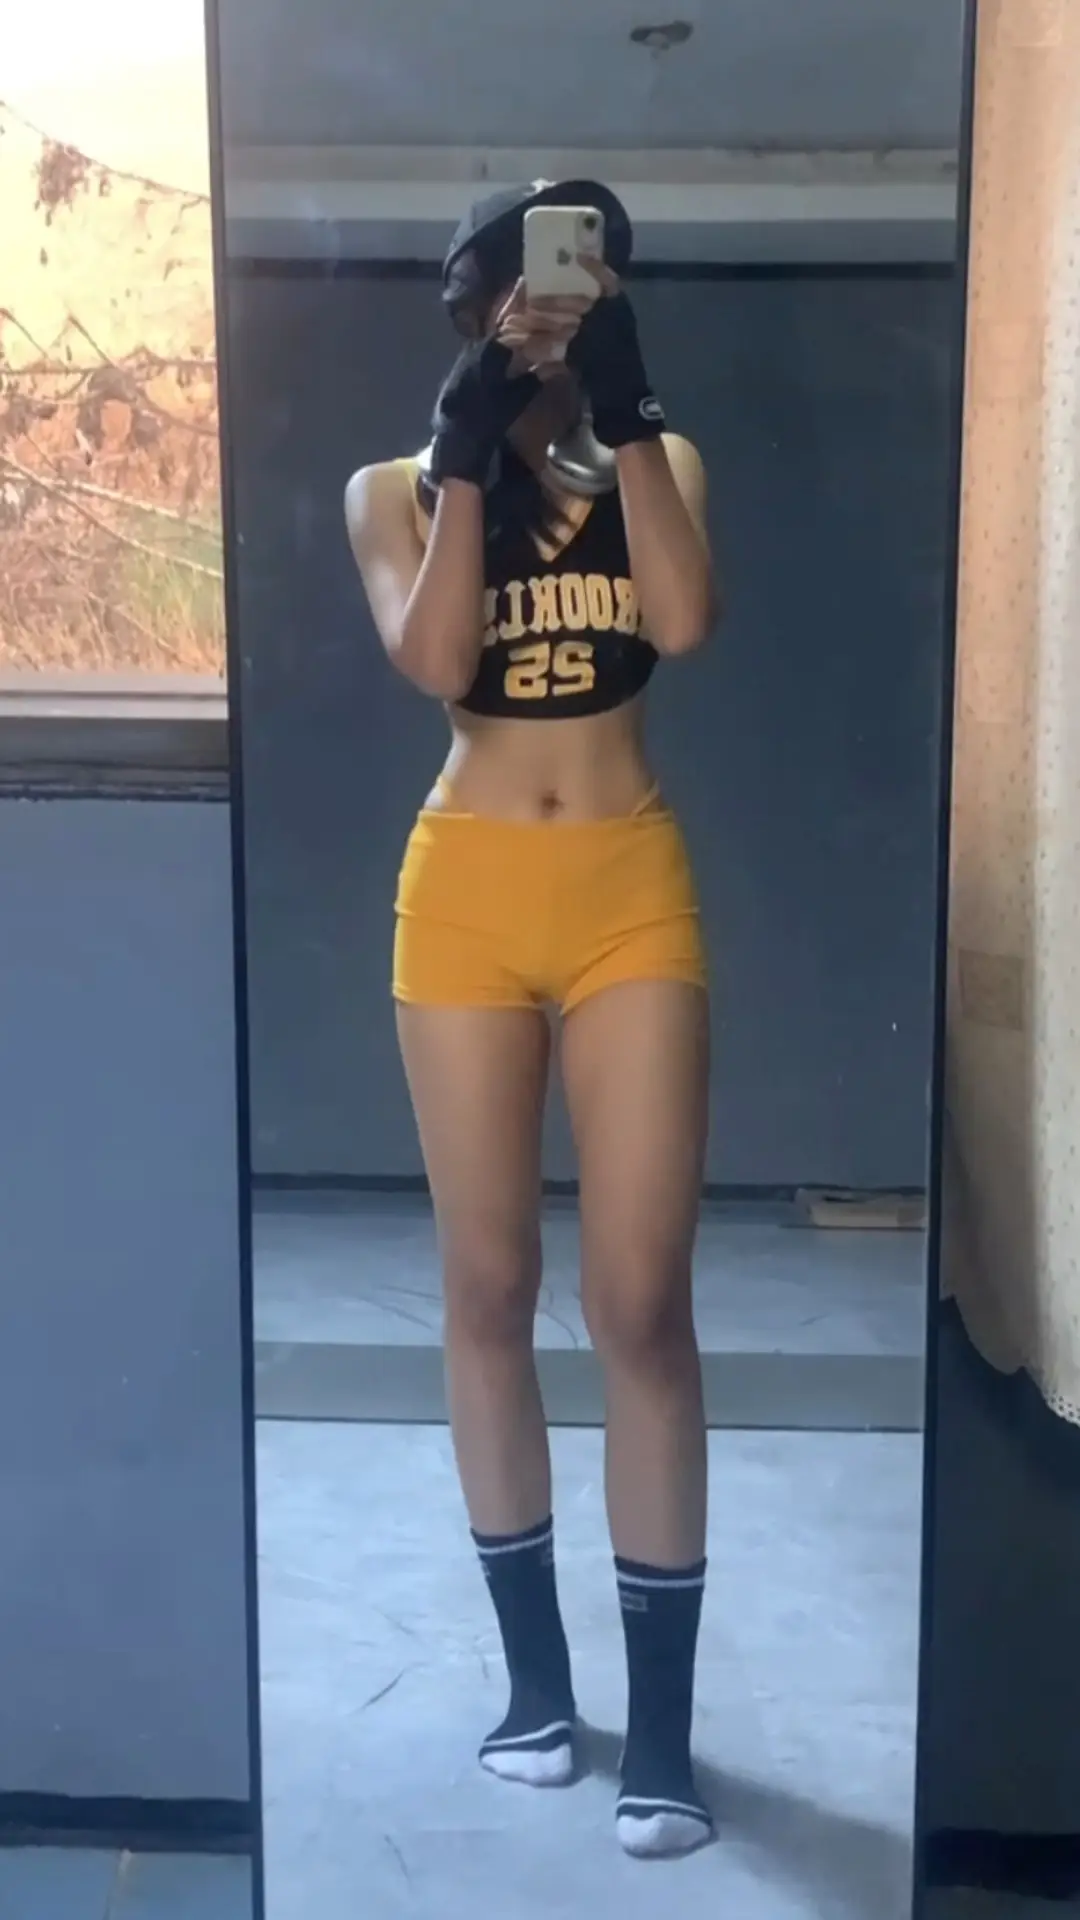 how to wear a bodysuit with shorts - Lemon8 Search